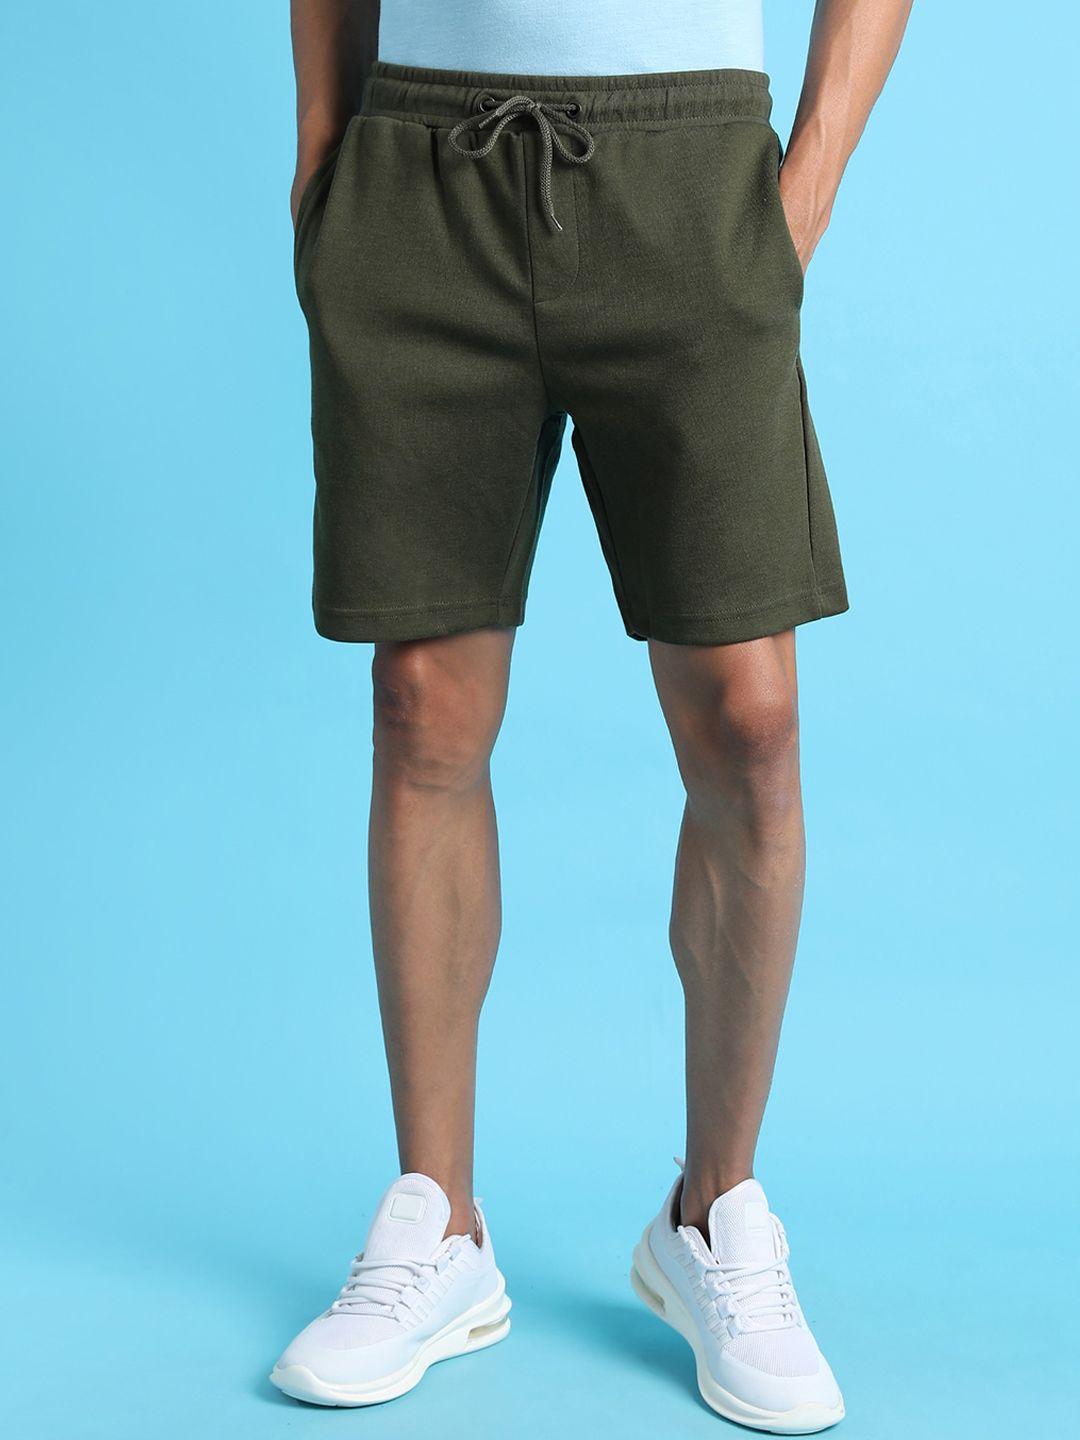 campus-sutra-men-olive-green-outdoor-sports-shorts